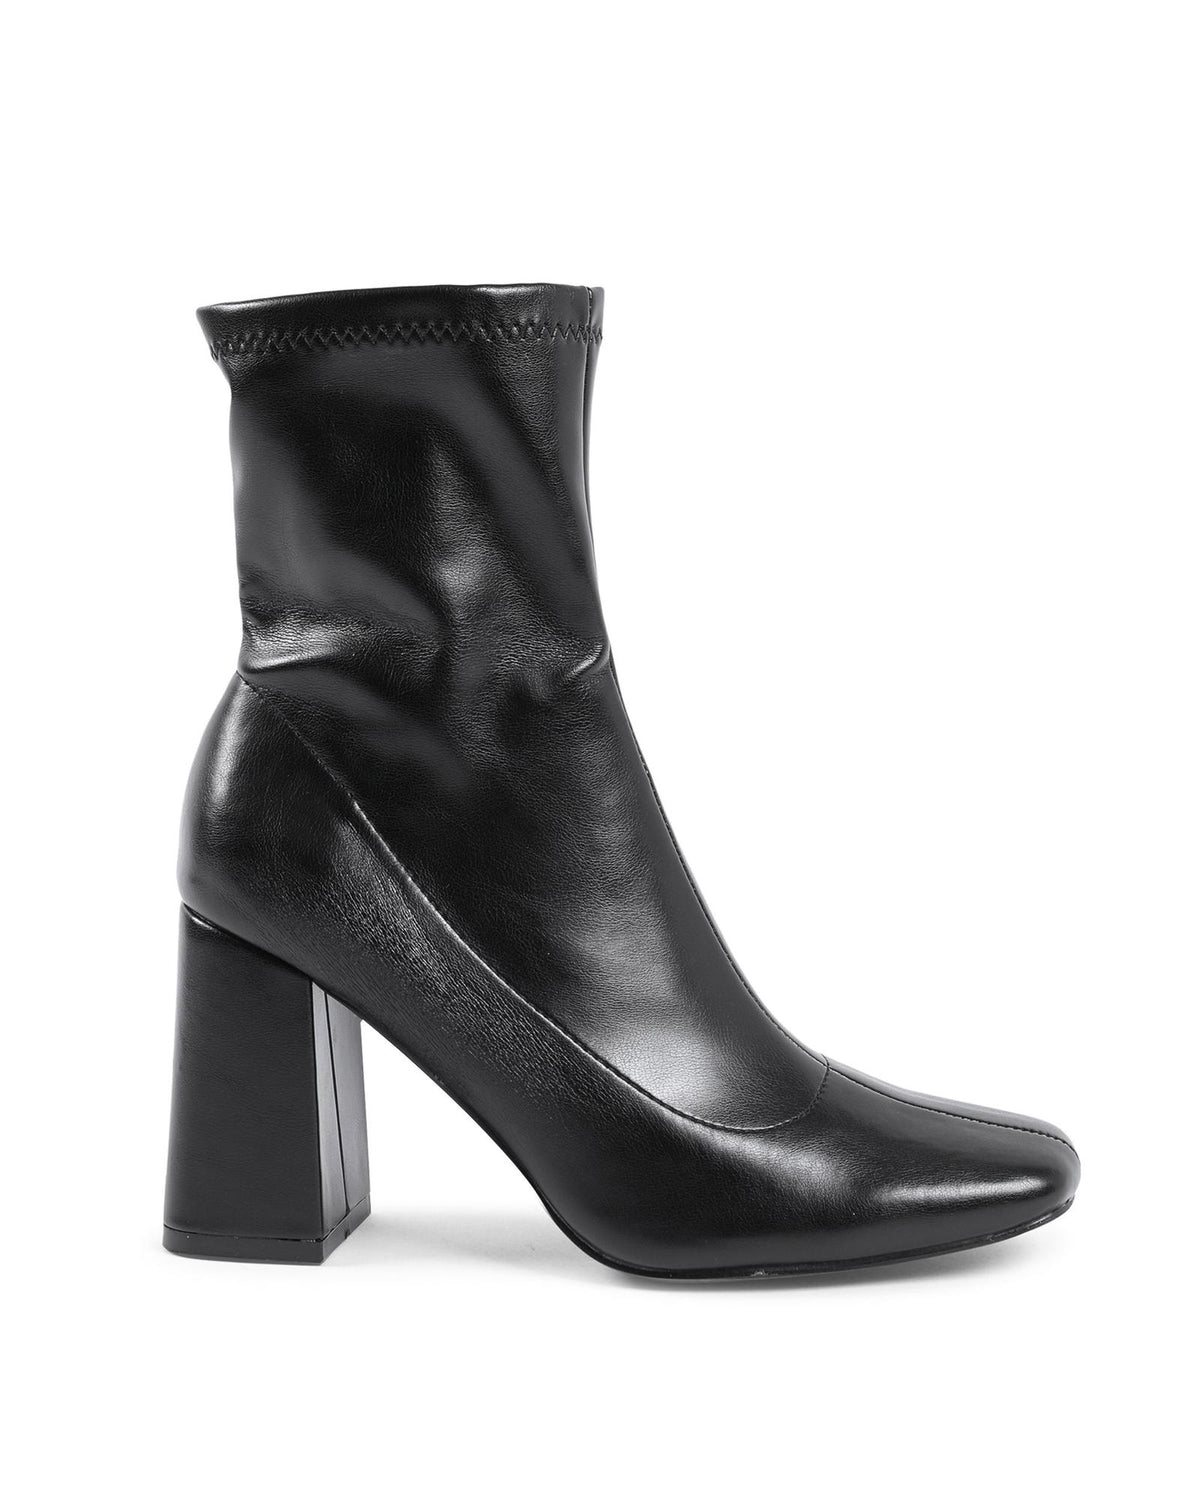 Synthetic Leather Ankle Boots with 9cm Heel - 40 EU